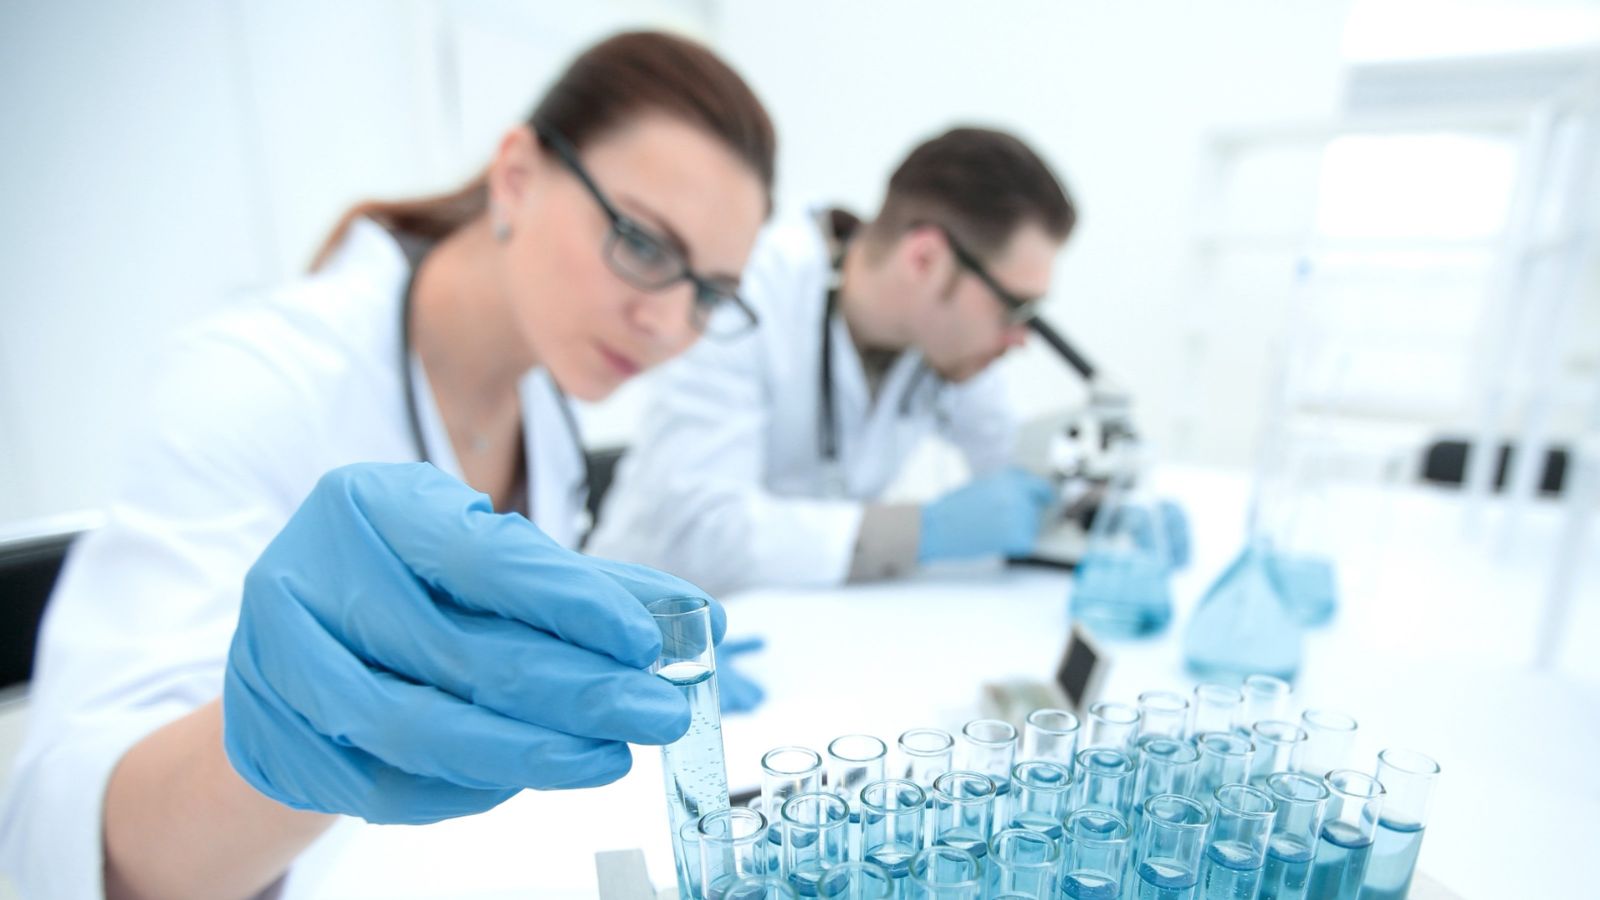 Two white-coated researchers in a laboratory using a microscope to look at test tube samples